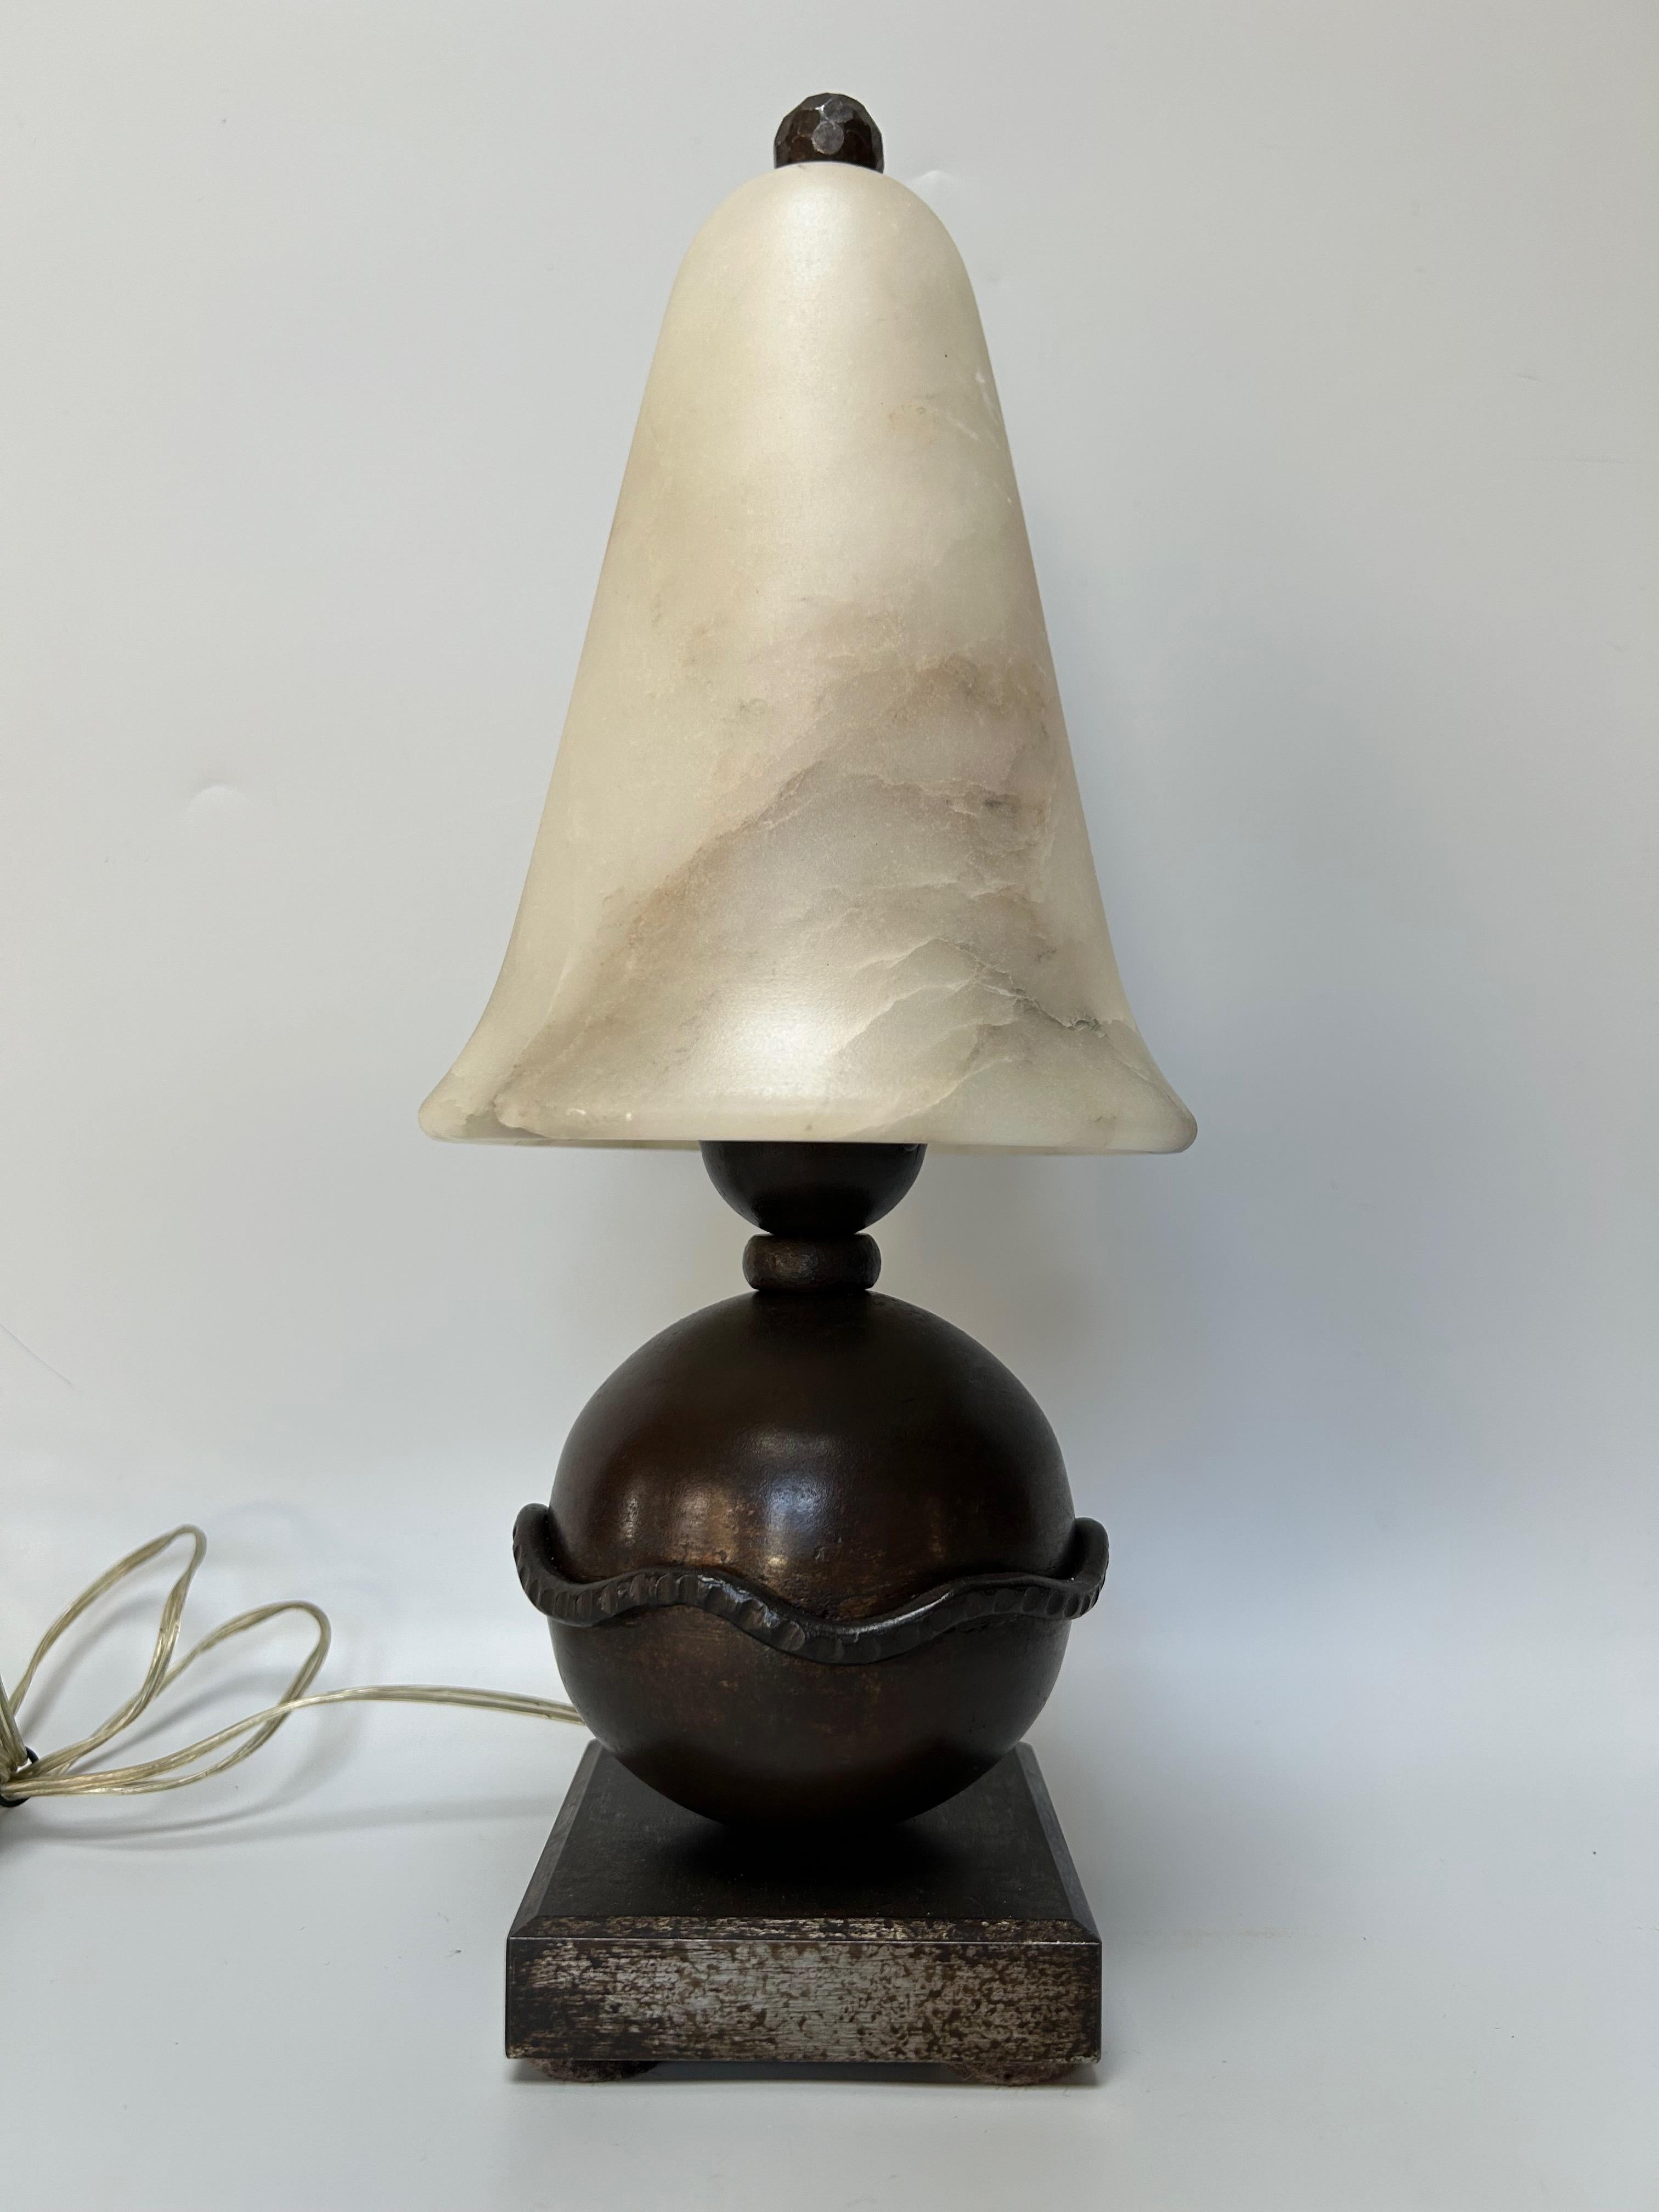 Art deco lamp circa 1925.
Wrought iron base, sphere model.
Alabaster tulip.
Electrified, B22 socket, bayonet LED bulb.
In perfect condition.

Height: 33cm
Width: 9 cm
Depth: 9cm
Weight: 3.1 kg

Edgar Brandt was born in Paris in 1880 and studied at